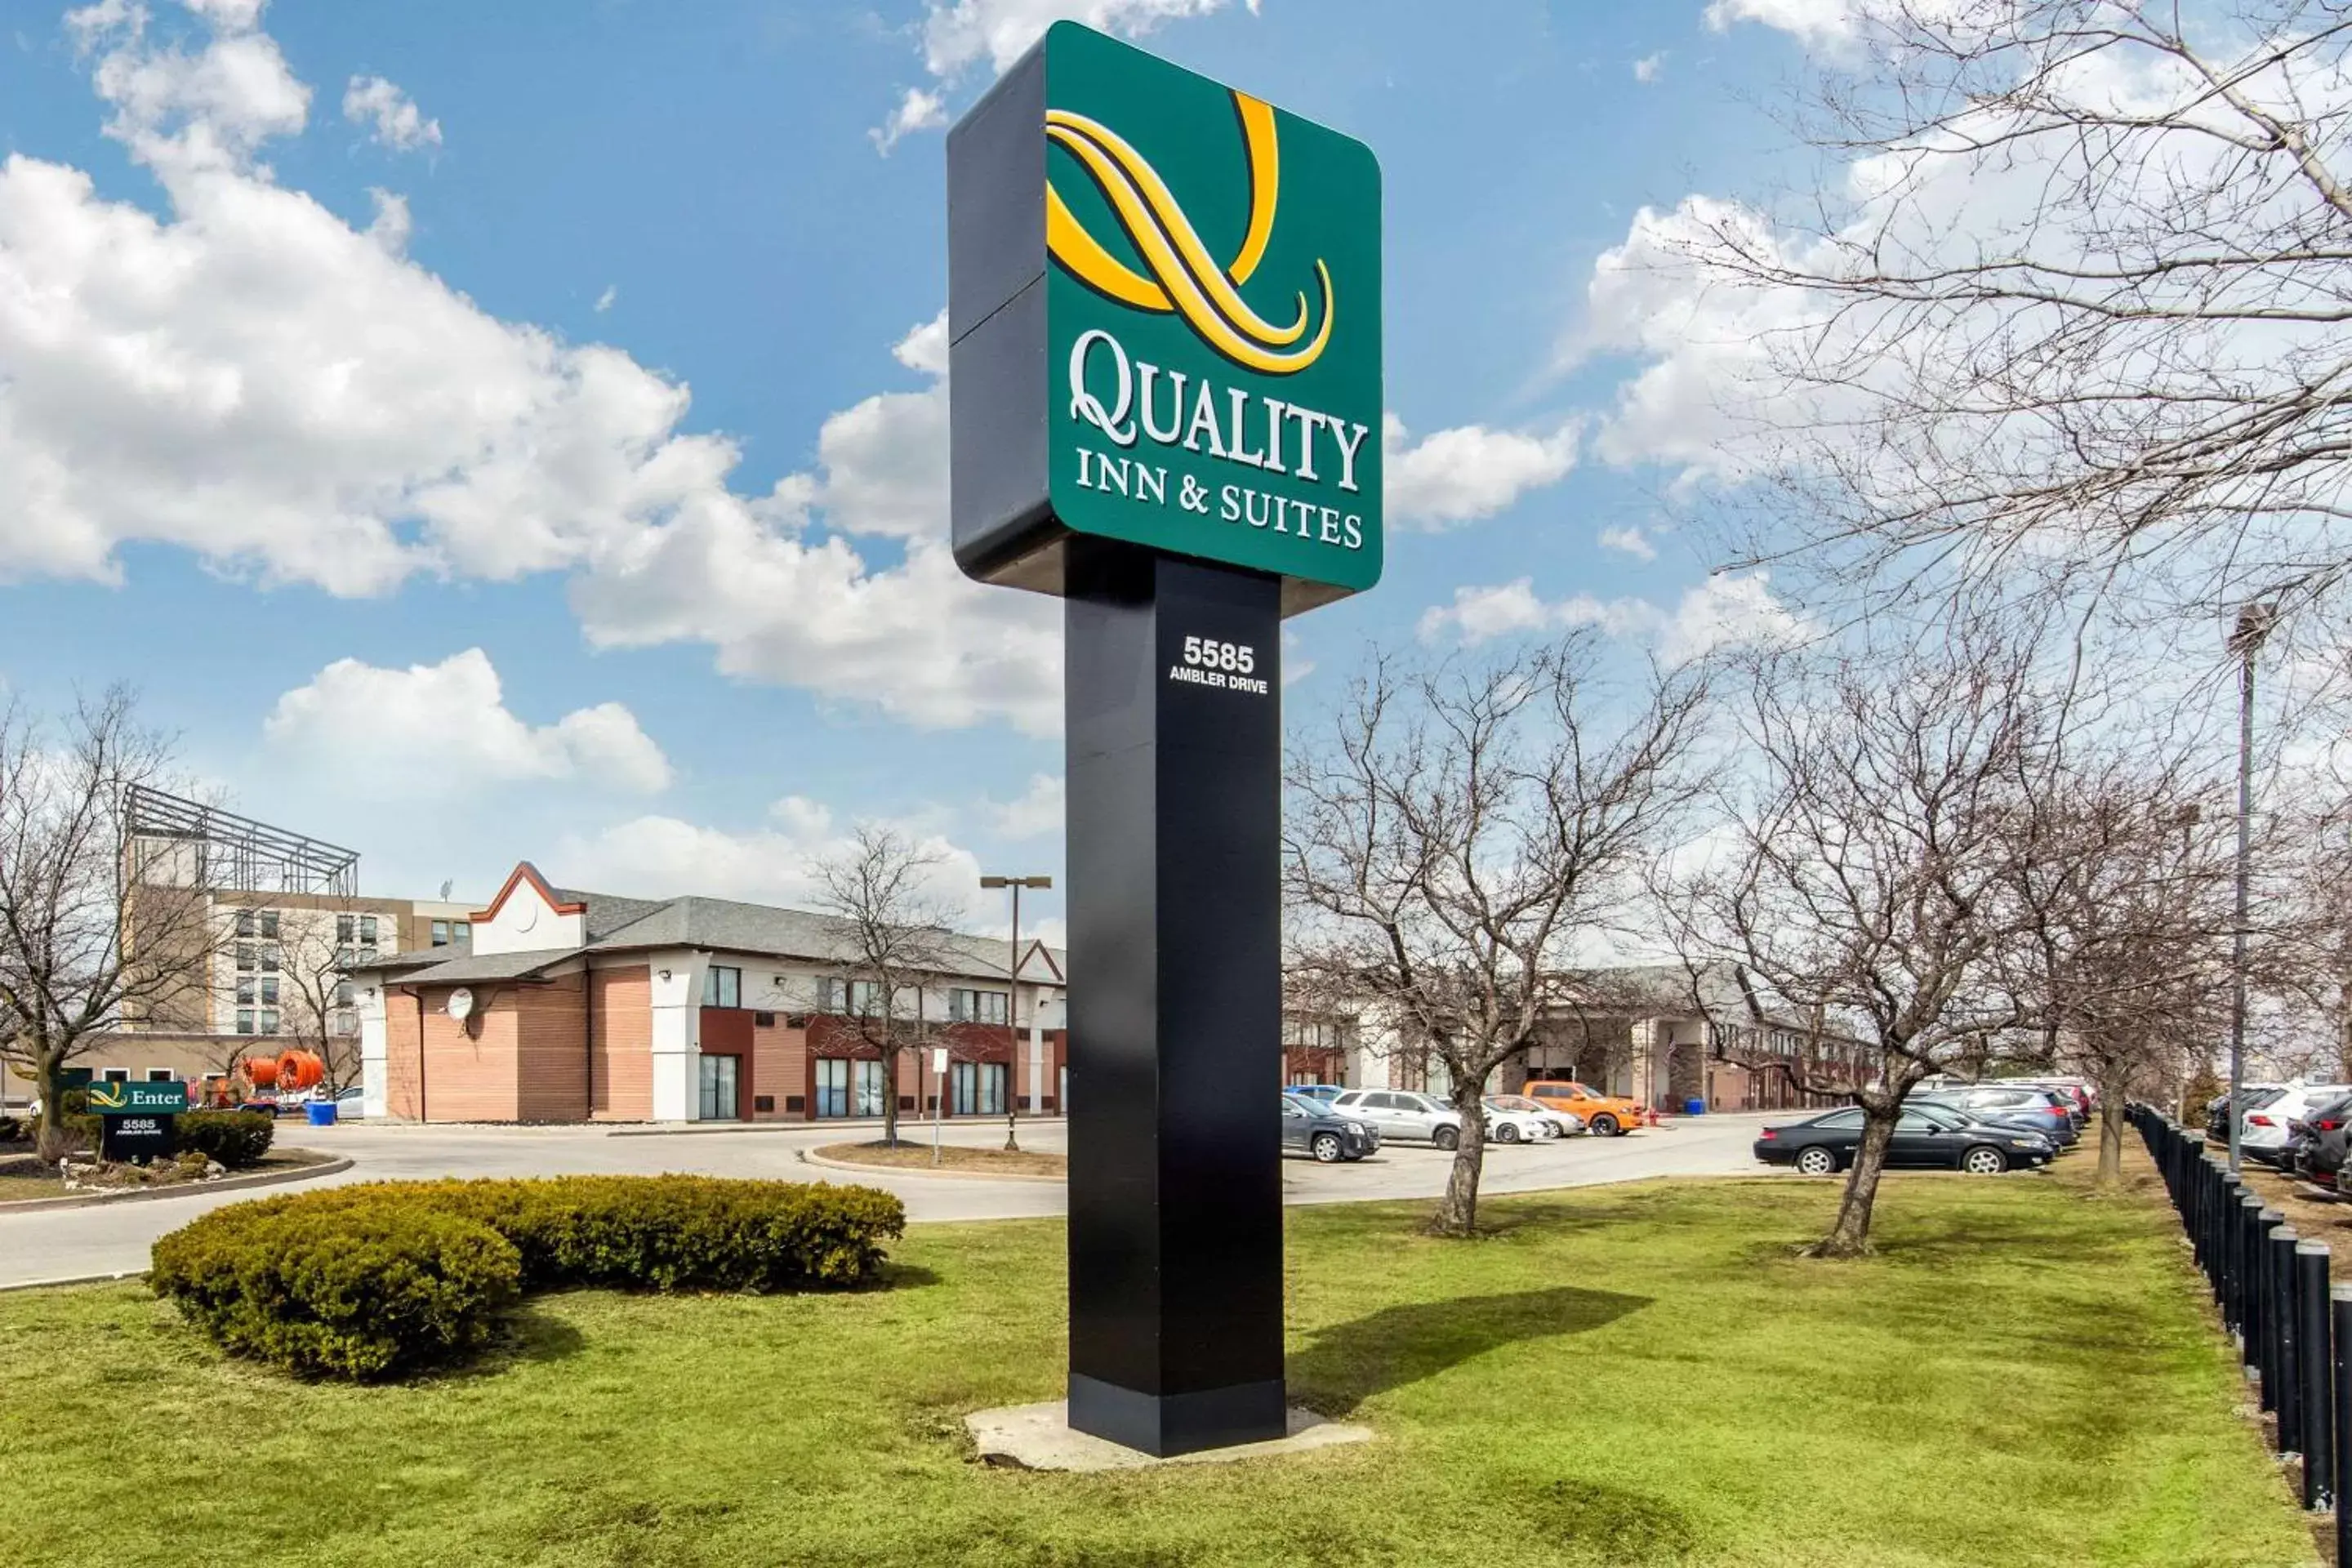 Property Building in Quality Inn & Suites Toronto West 401-Dixie